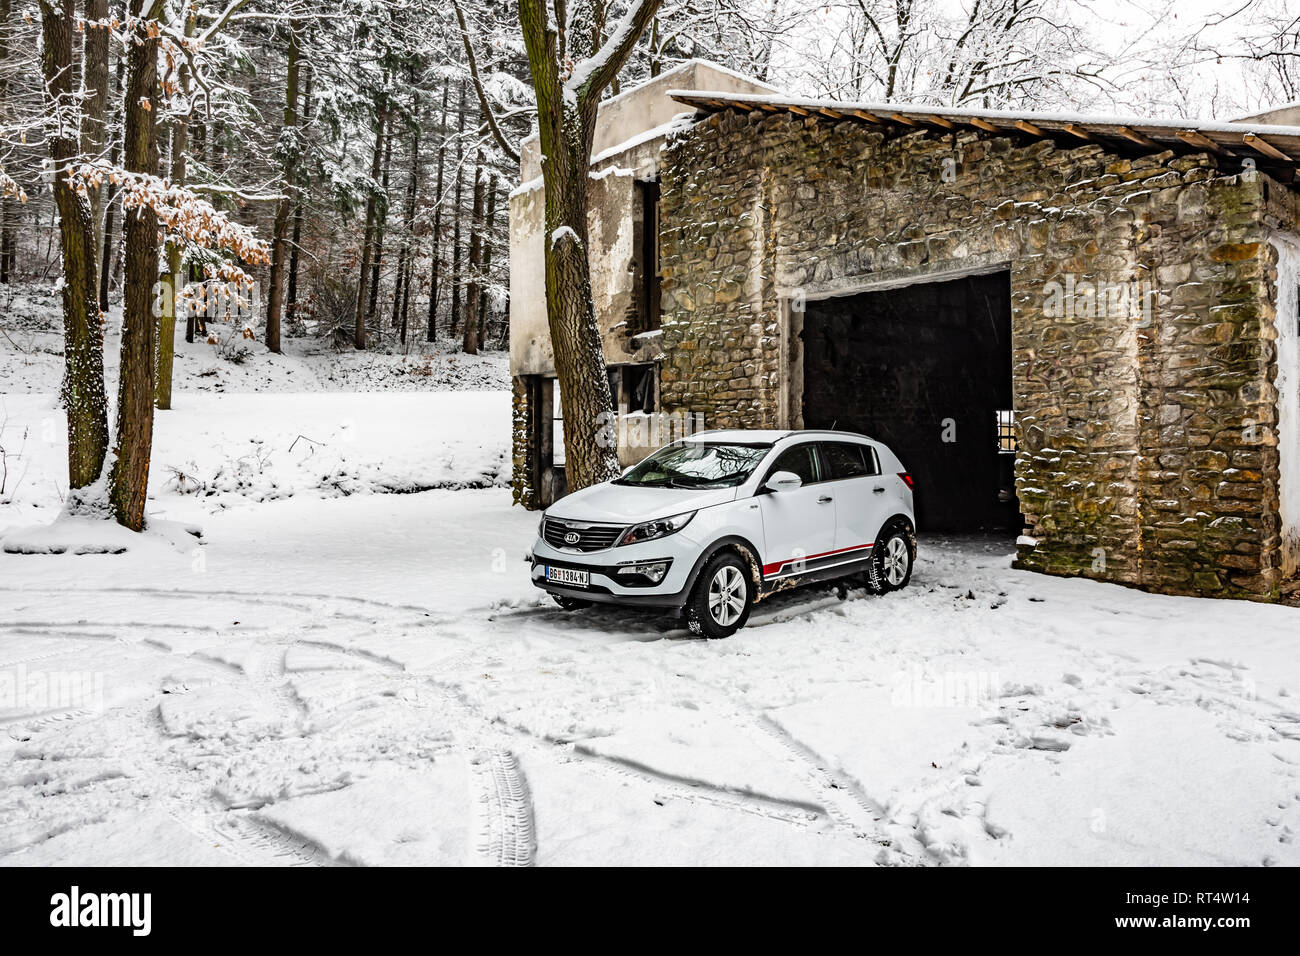 Kia Sportage 2.0 CRDI awd or 4x4, white color, near the abandoned garage in a forest, covered with deep snow and ice. Extreme conditions and temperatu Stock Photo